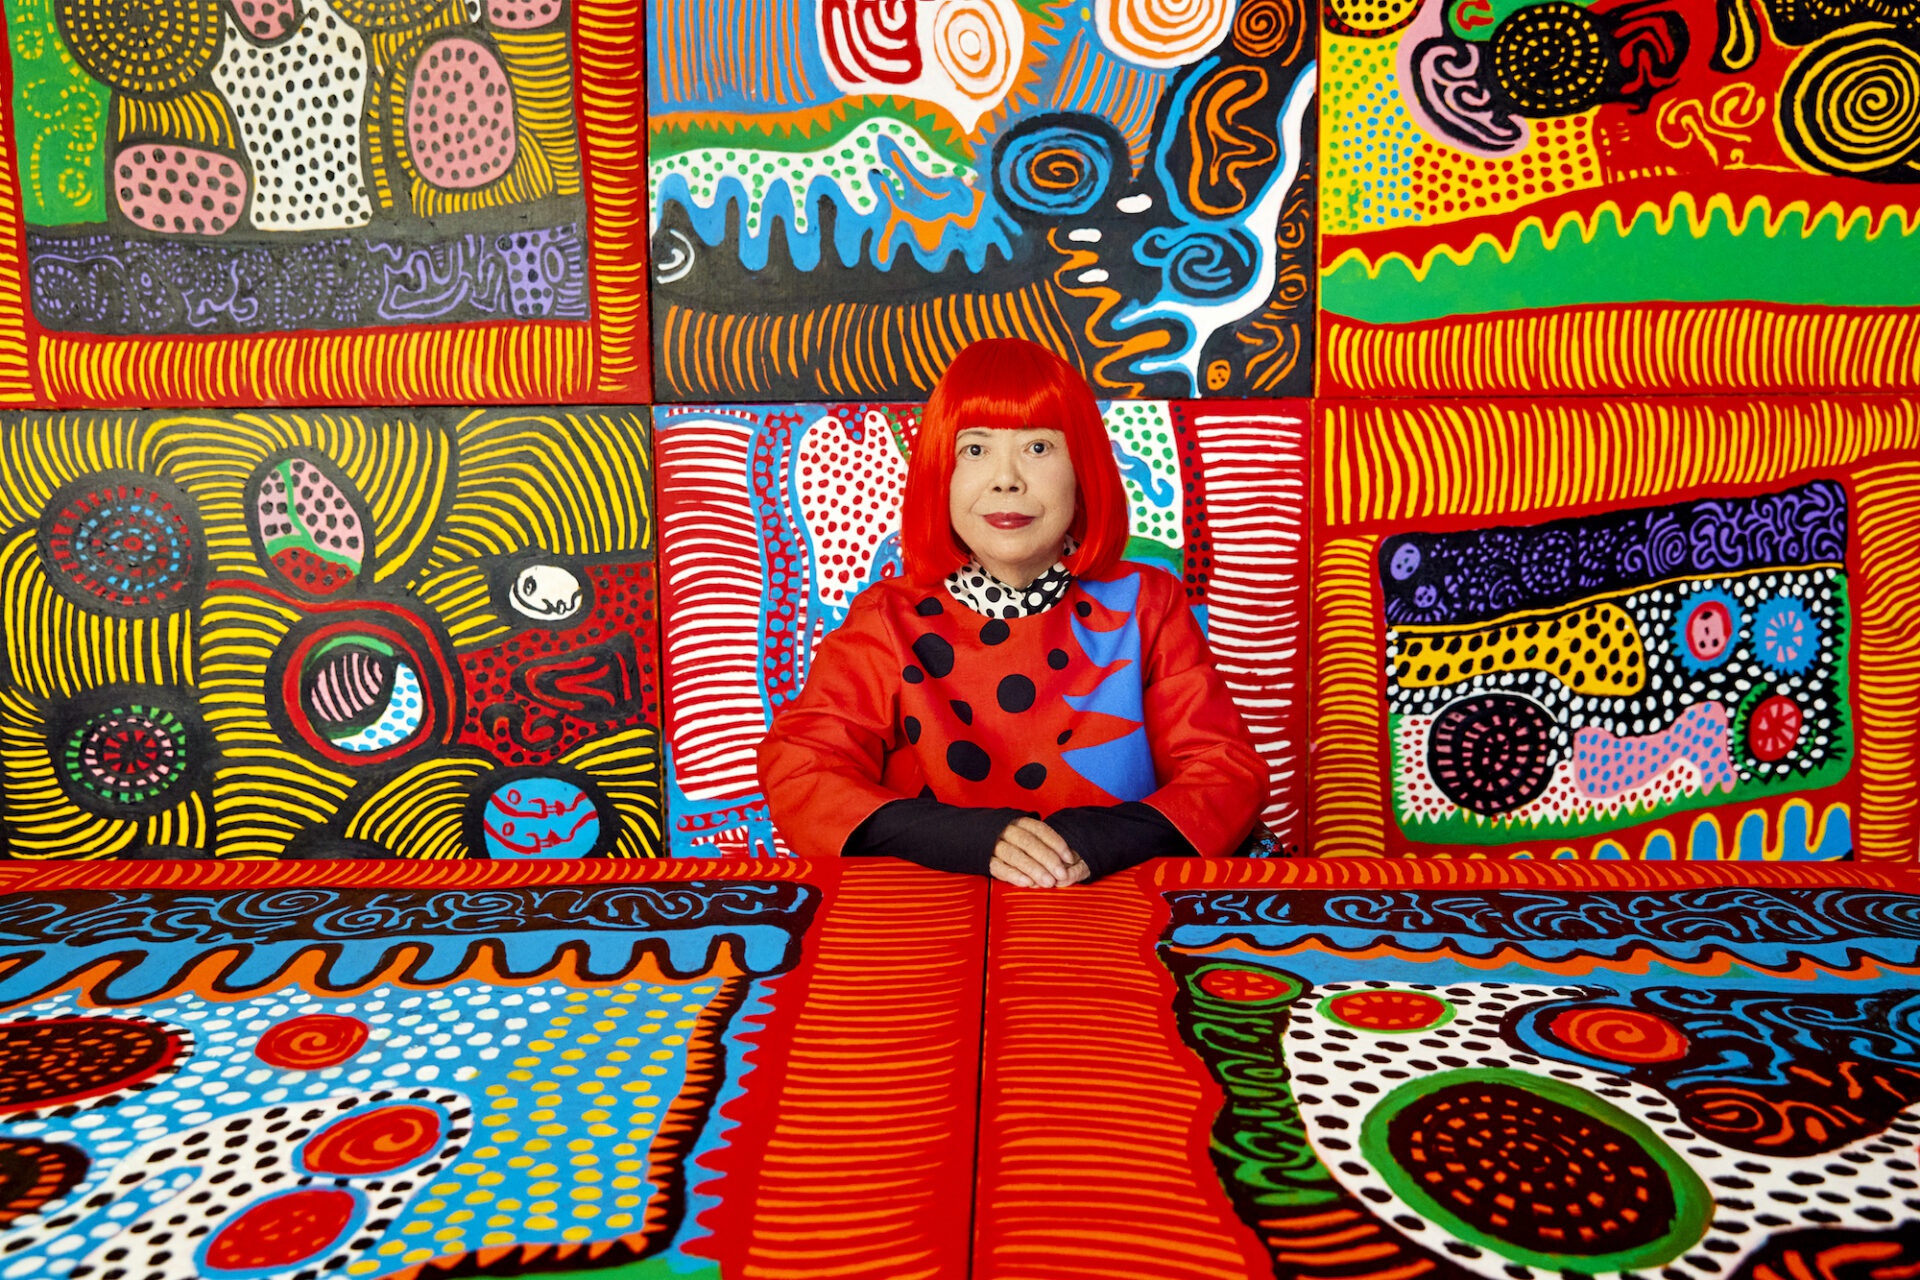 Portrait of the Japanese artist Yayoi Kusama. She was the best selling artist at auction in 2023, fetching $80 million dollars and surpassing David Hockney and Yoshitomo Nara.